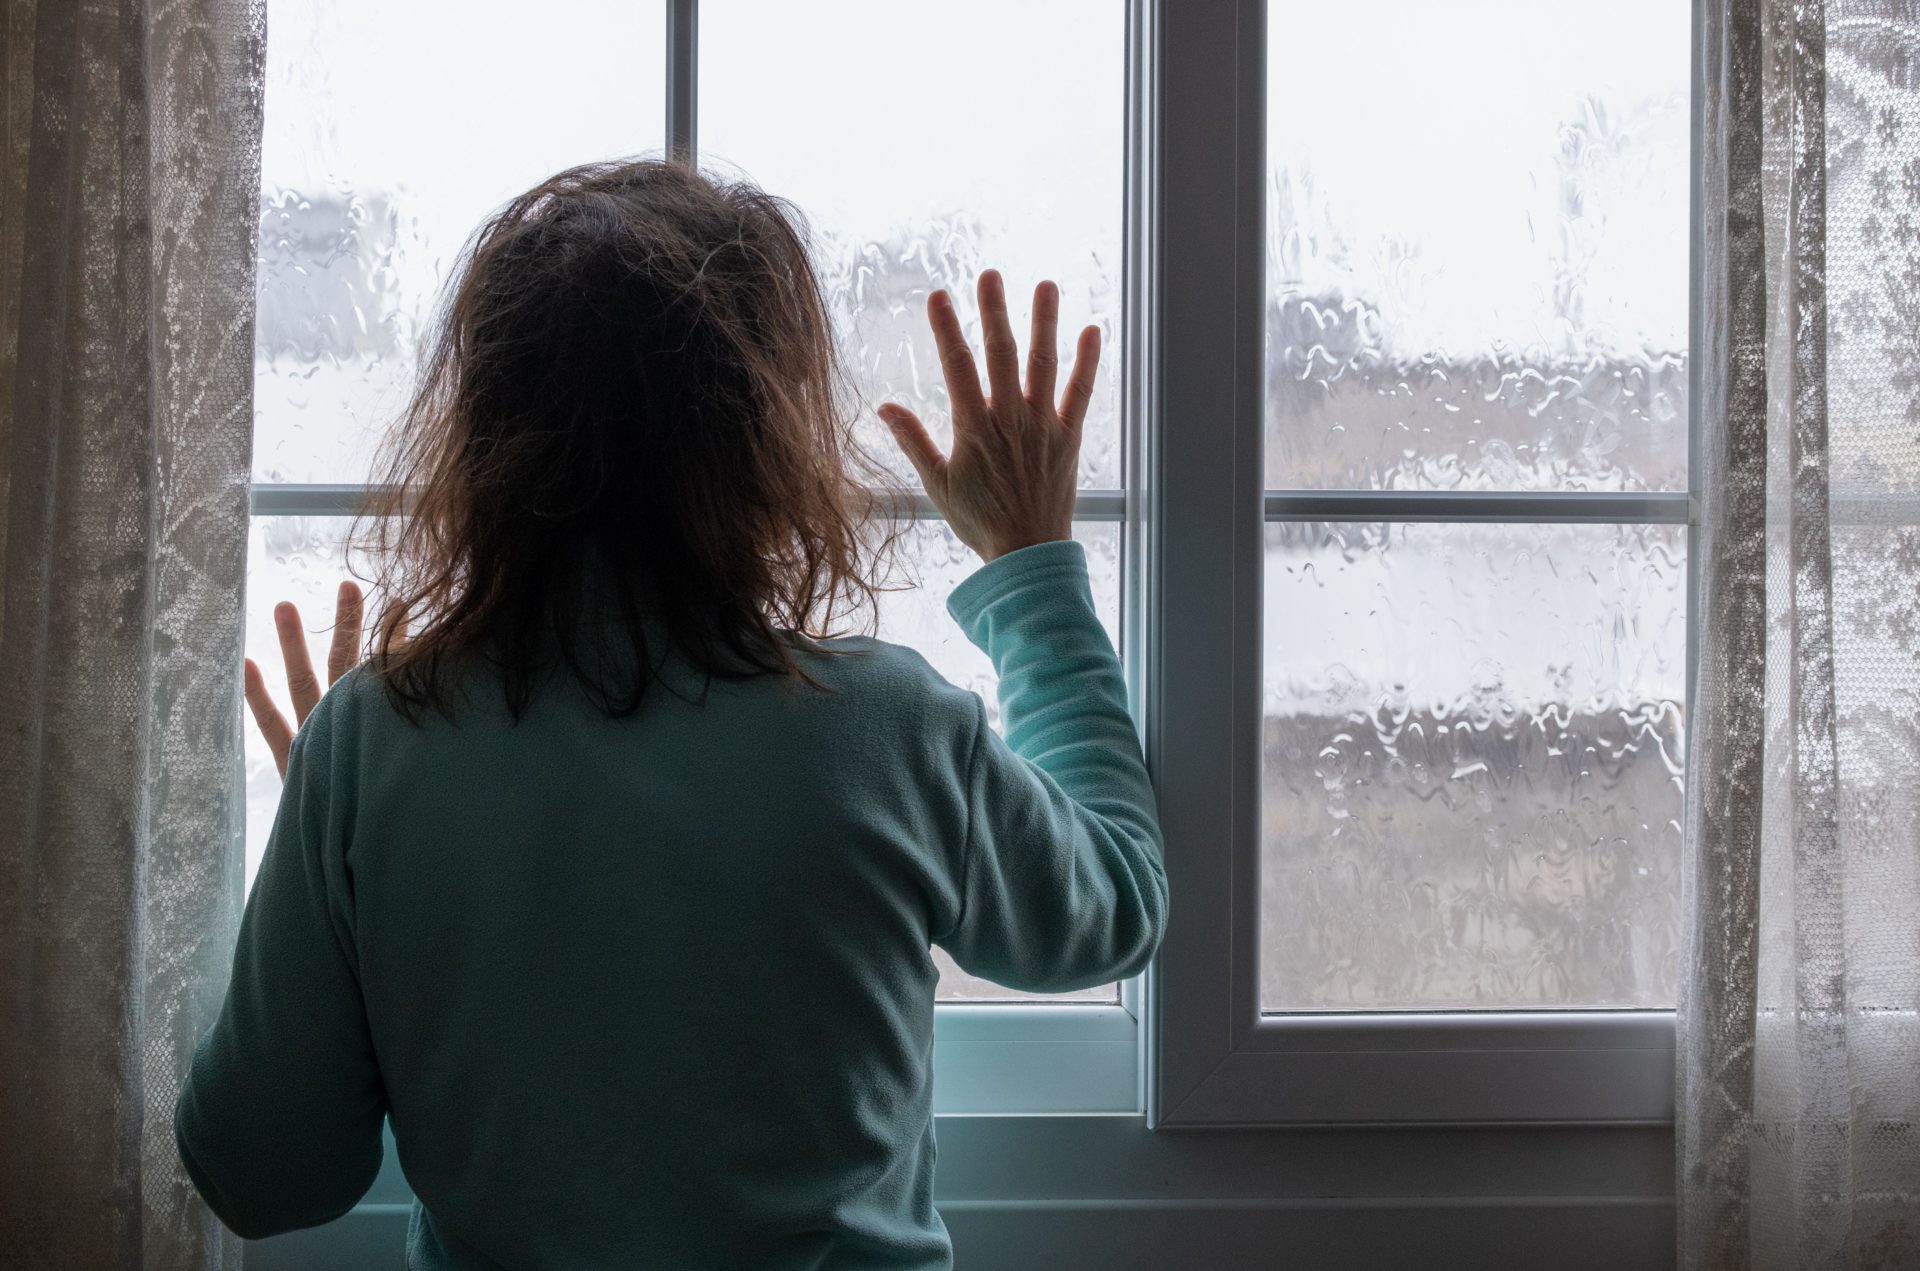 Woman looking out of window on rainy day. Conept image; female depression, domestic abuse, human trafficking, domestic violence, mental health...